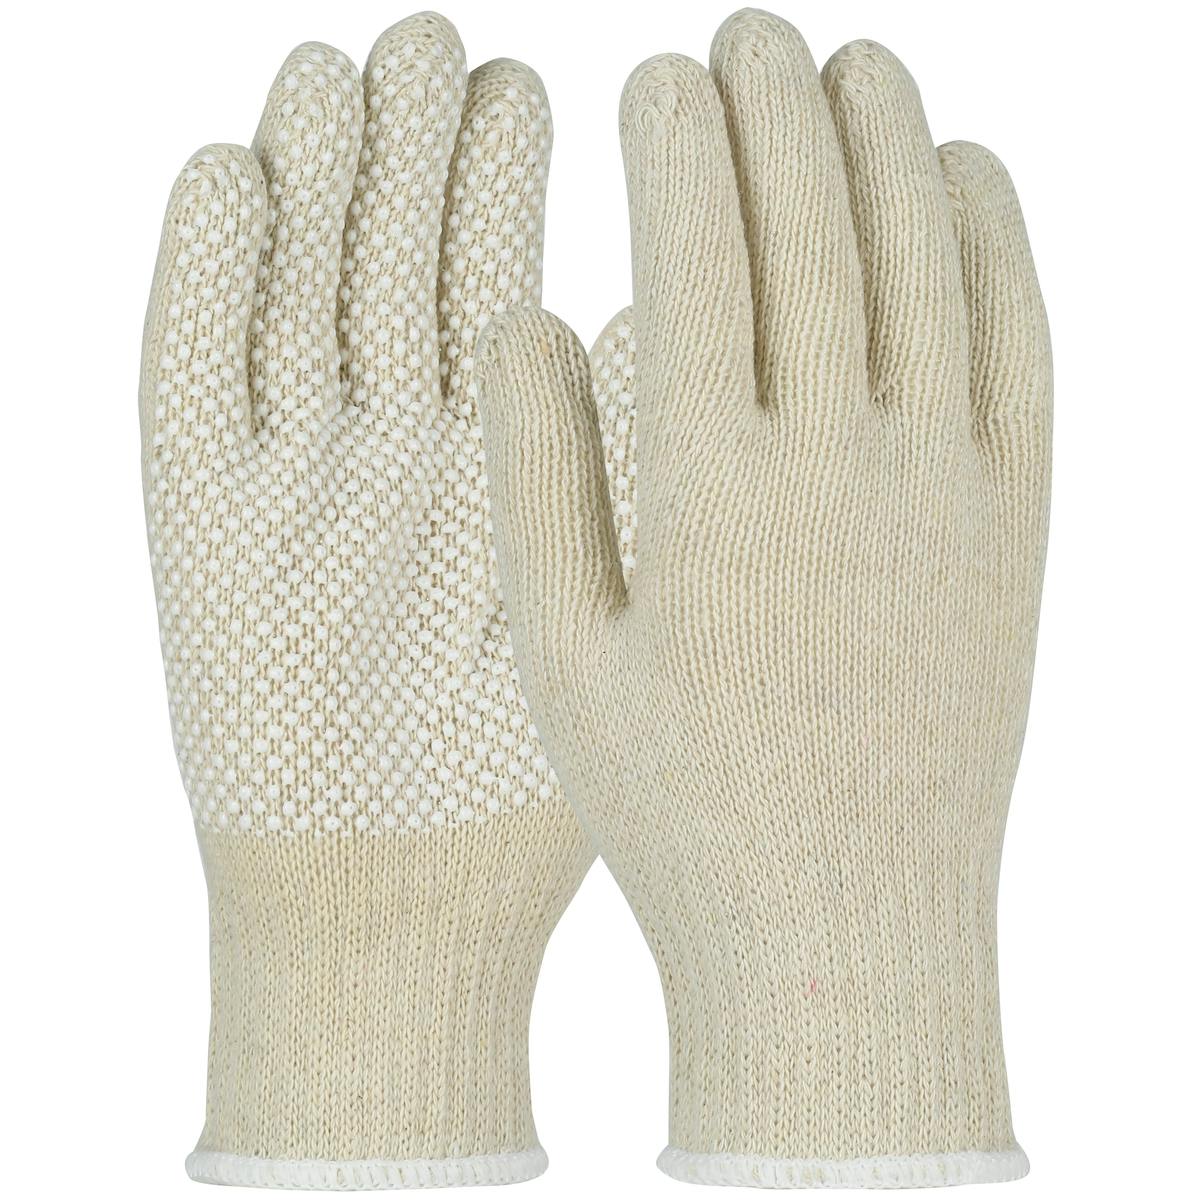 Heavy Weight Seamless Knit Cotton/Polyester Glove with PVC Dotted Grip, White (MU30-WHPD1) - S_0